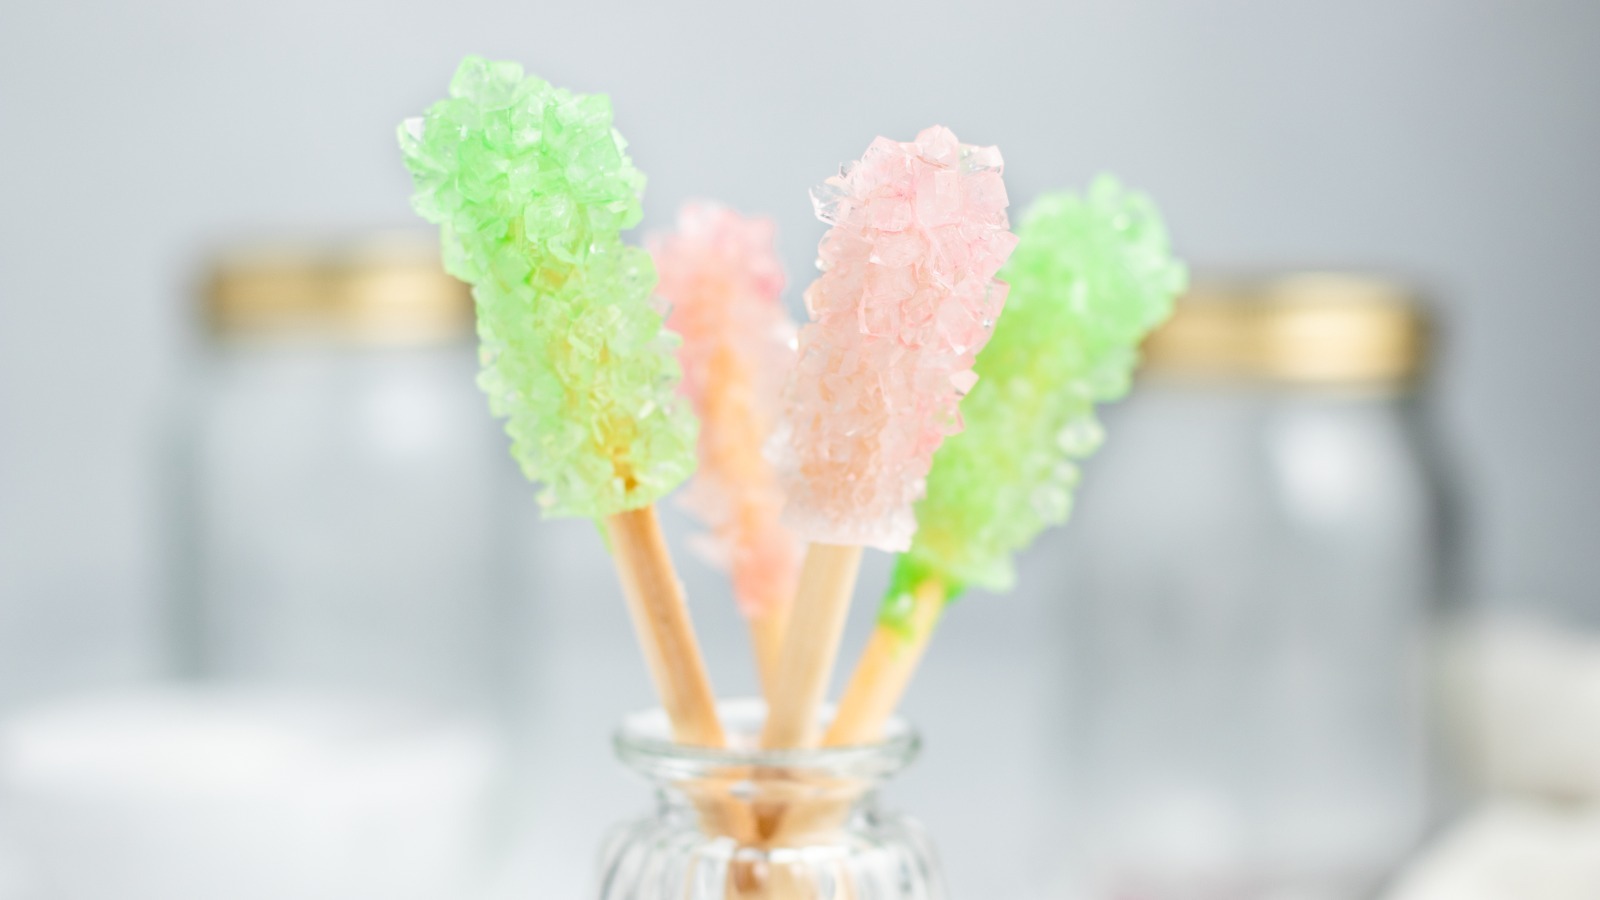 https://www.mashed.com/img/gallery/homemade-rock-candy-recipe/l-intro-1661990501.jpg